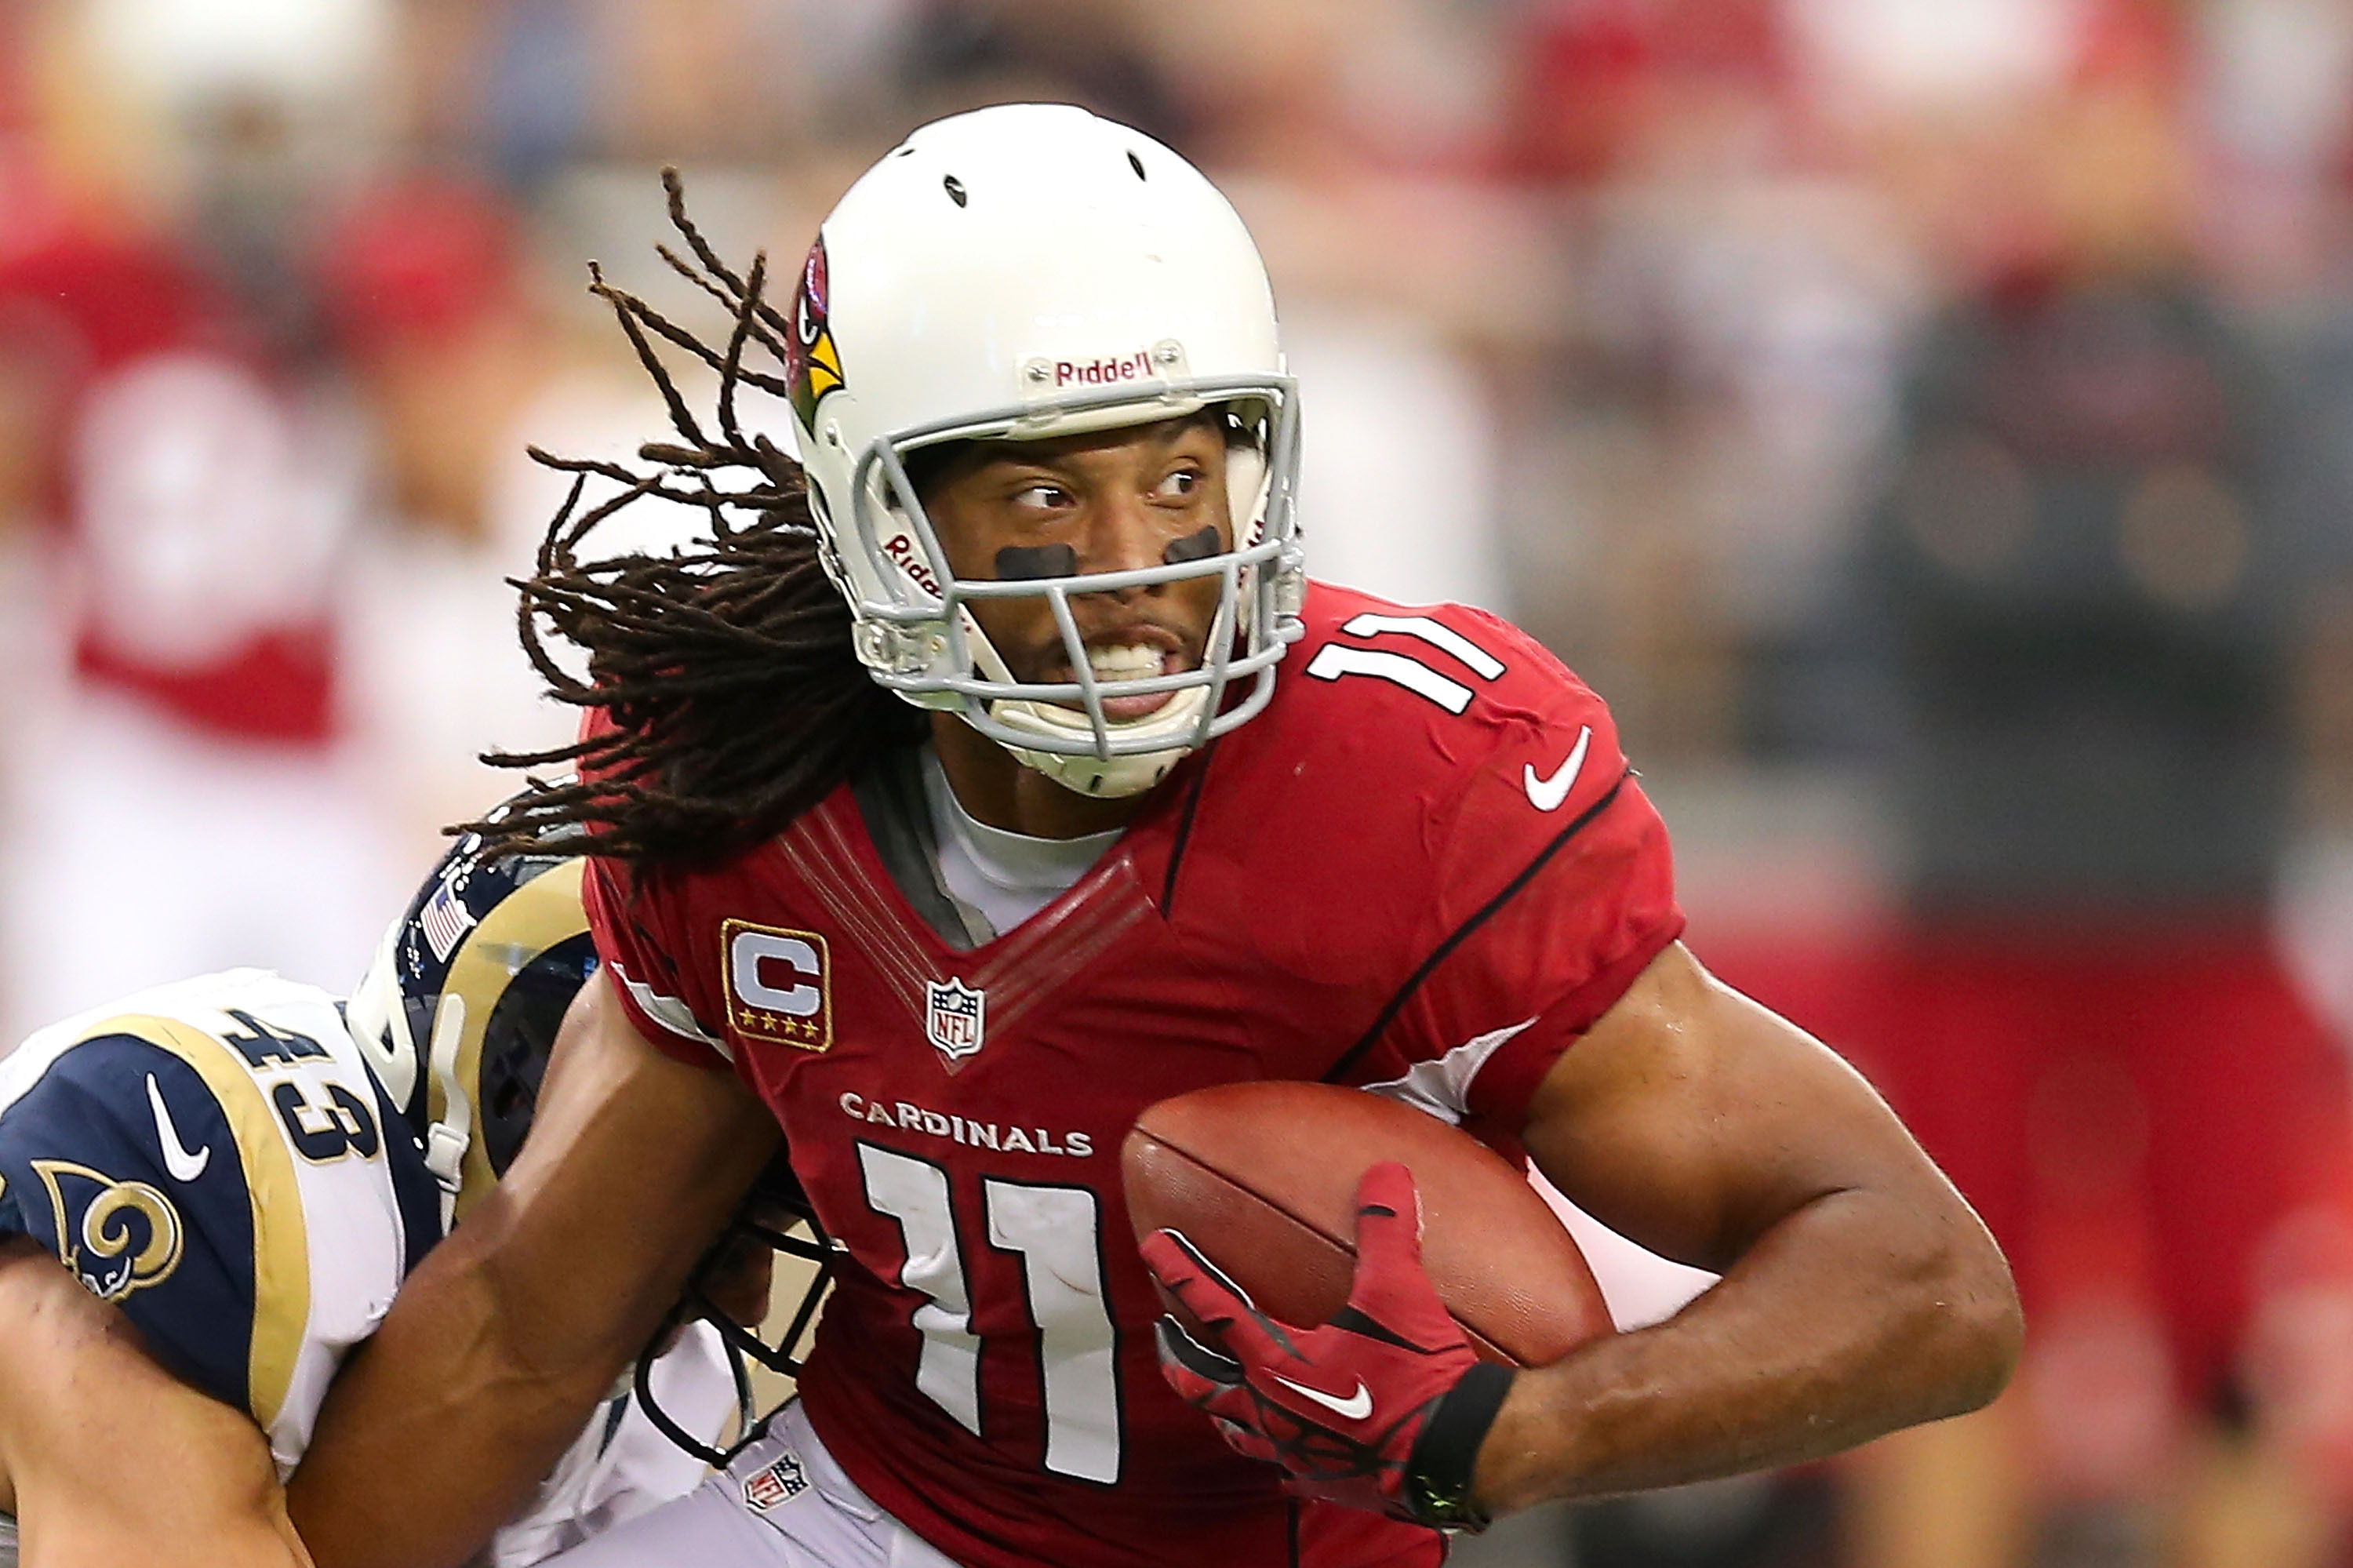 ARIZONA CARDINALS: The Cards moved to the desert in 1988, it's